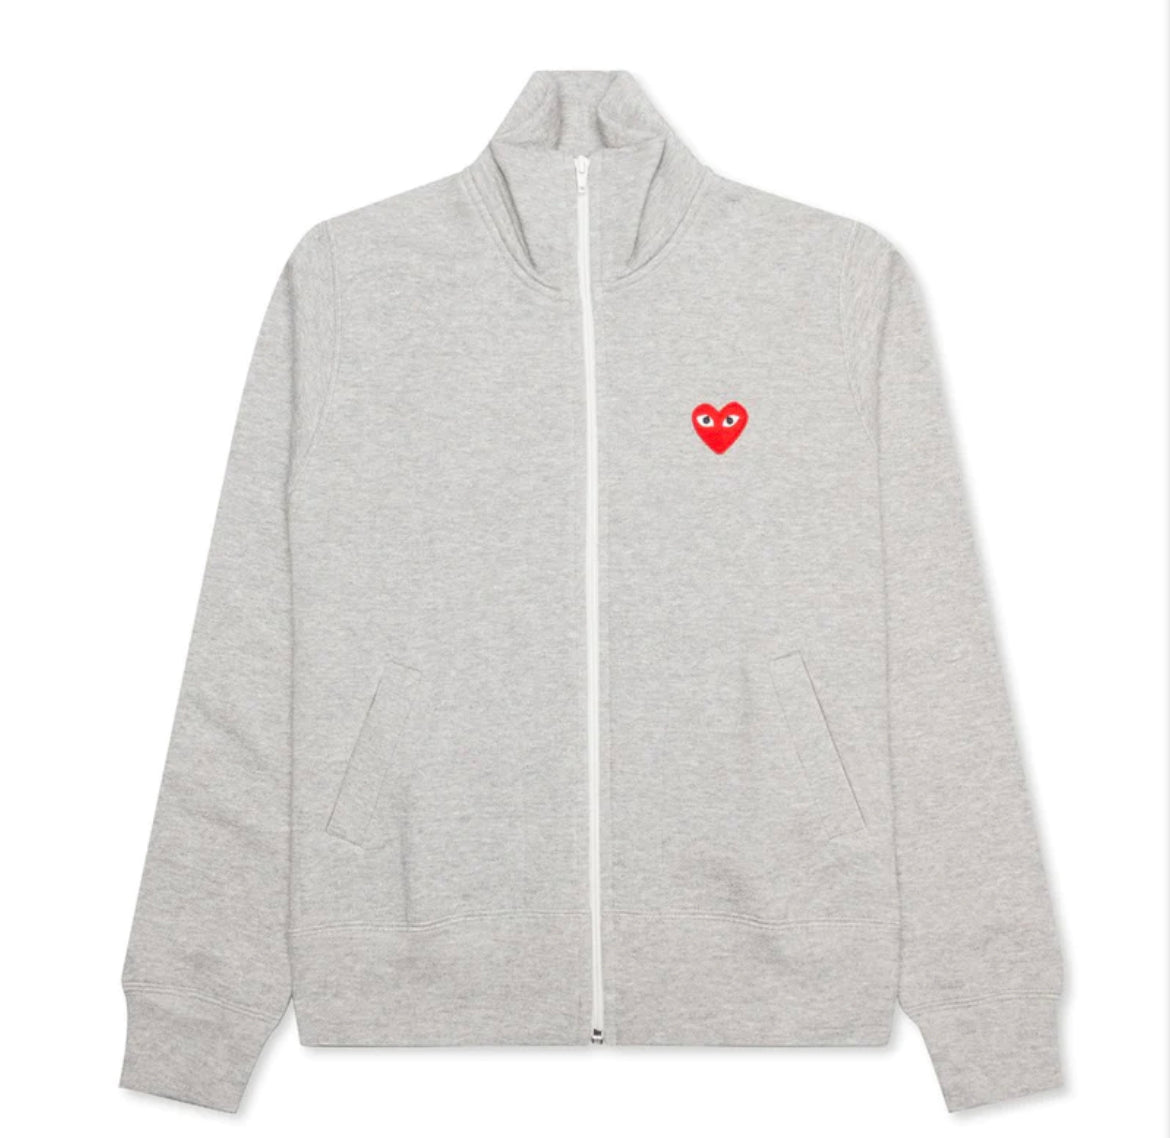 Comme Des Garcons Play “Multi Heart” Zip Up Sweater Grey